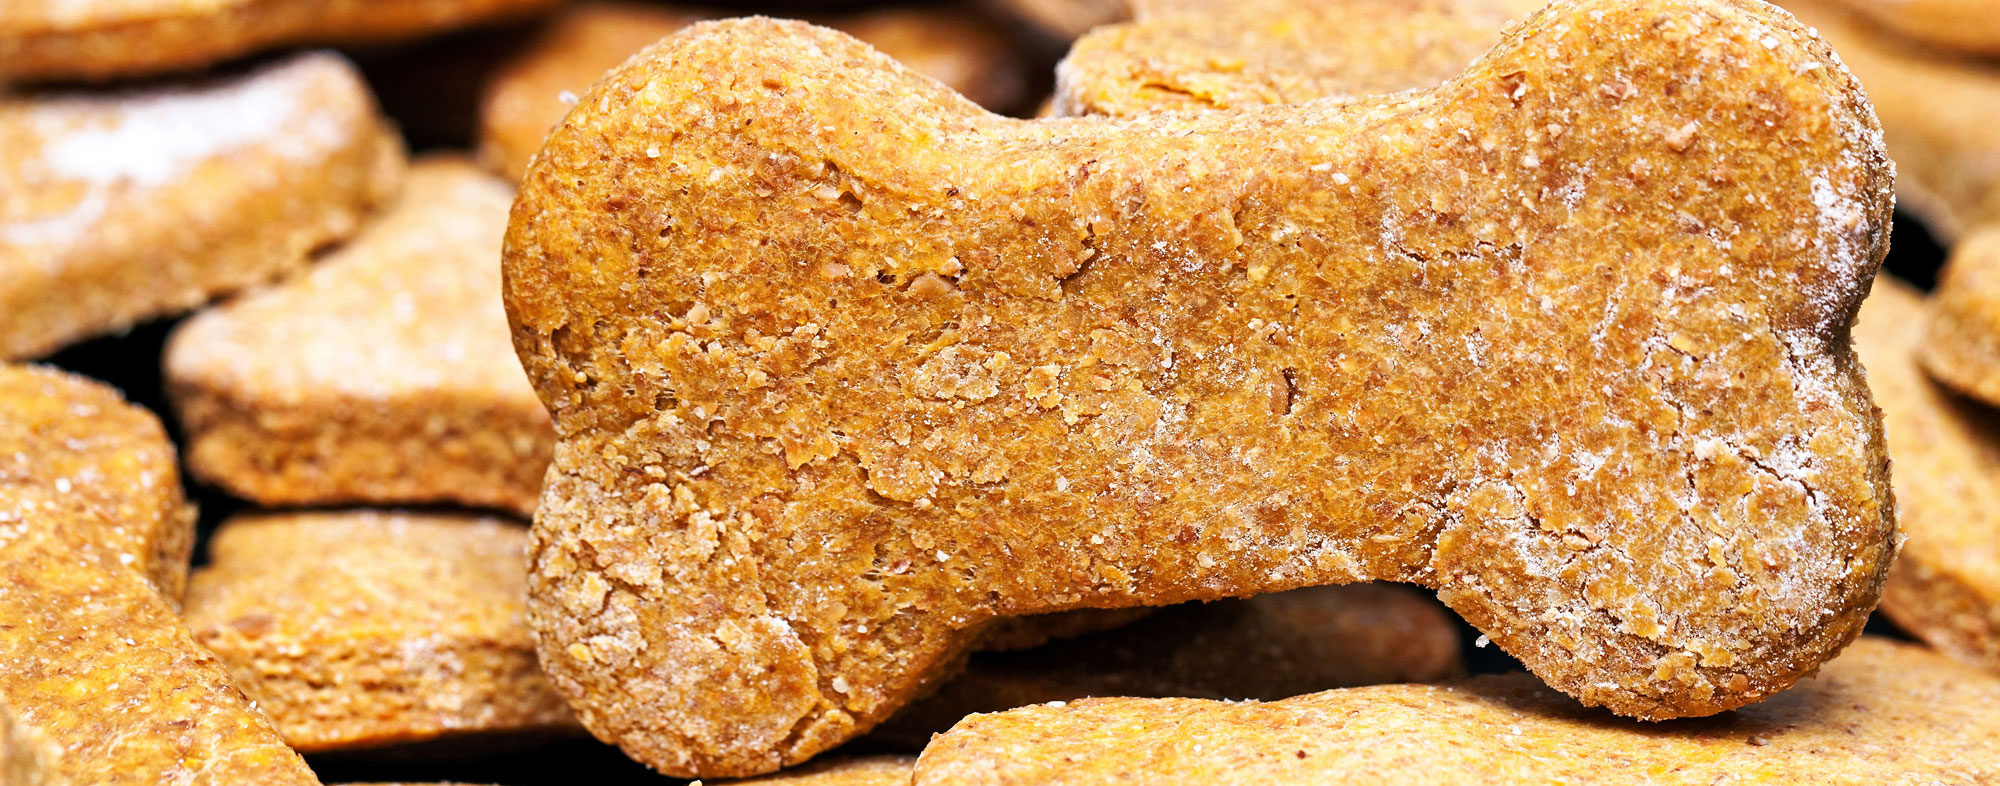 Sweet potato makes for a delicious dog biscuit your pet will love